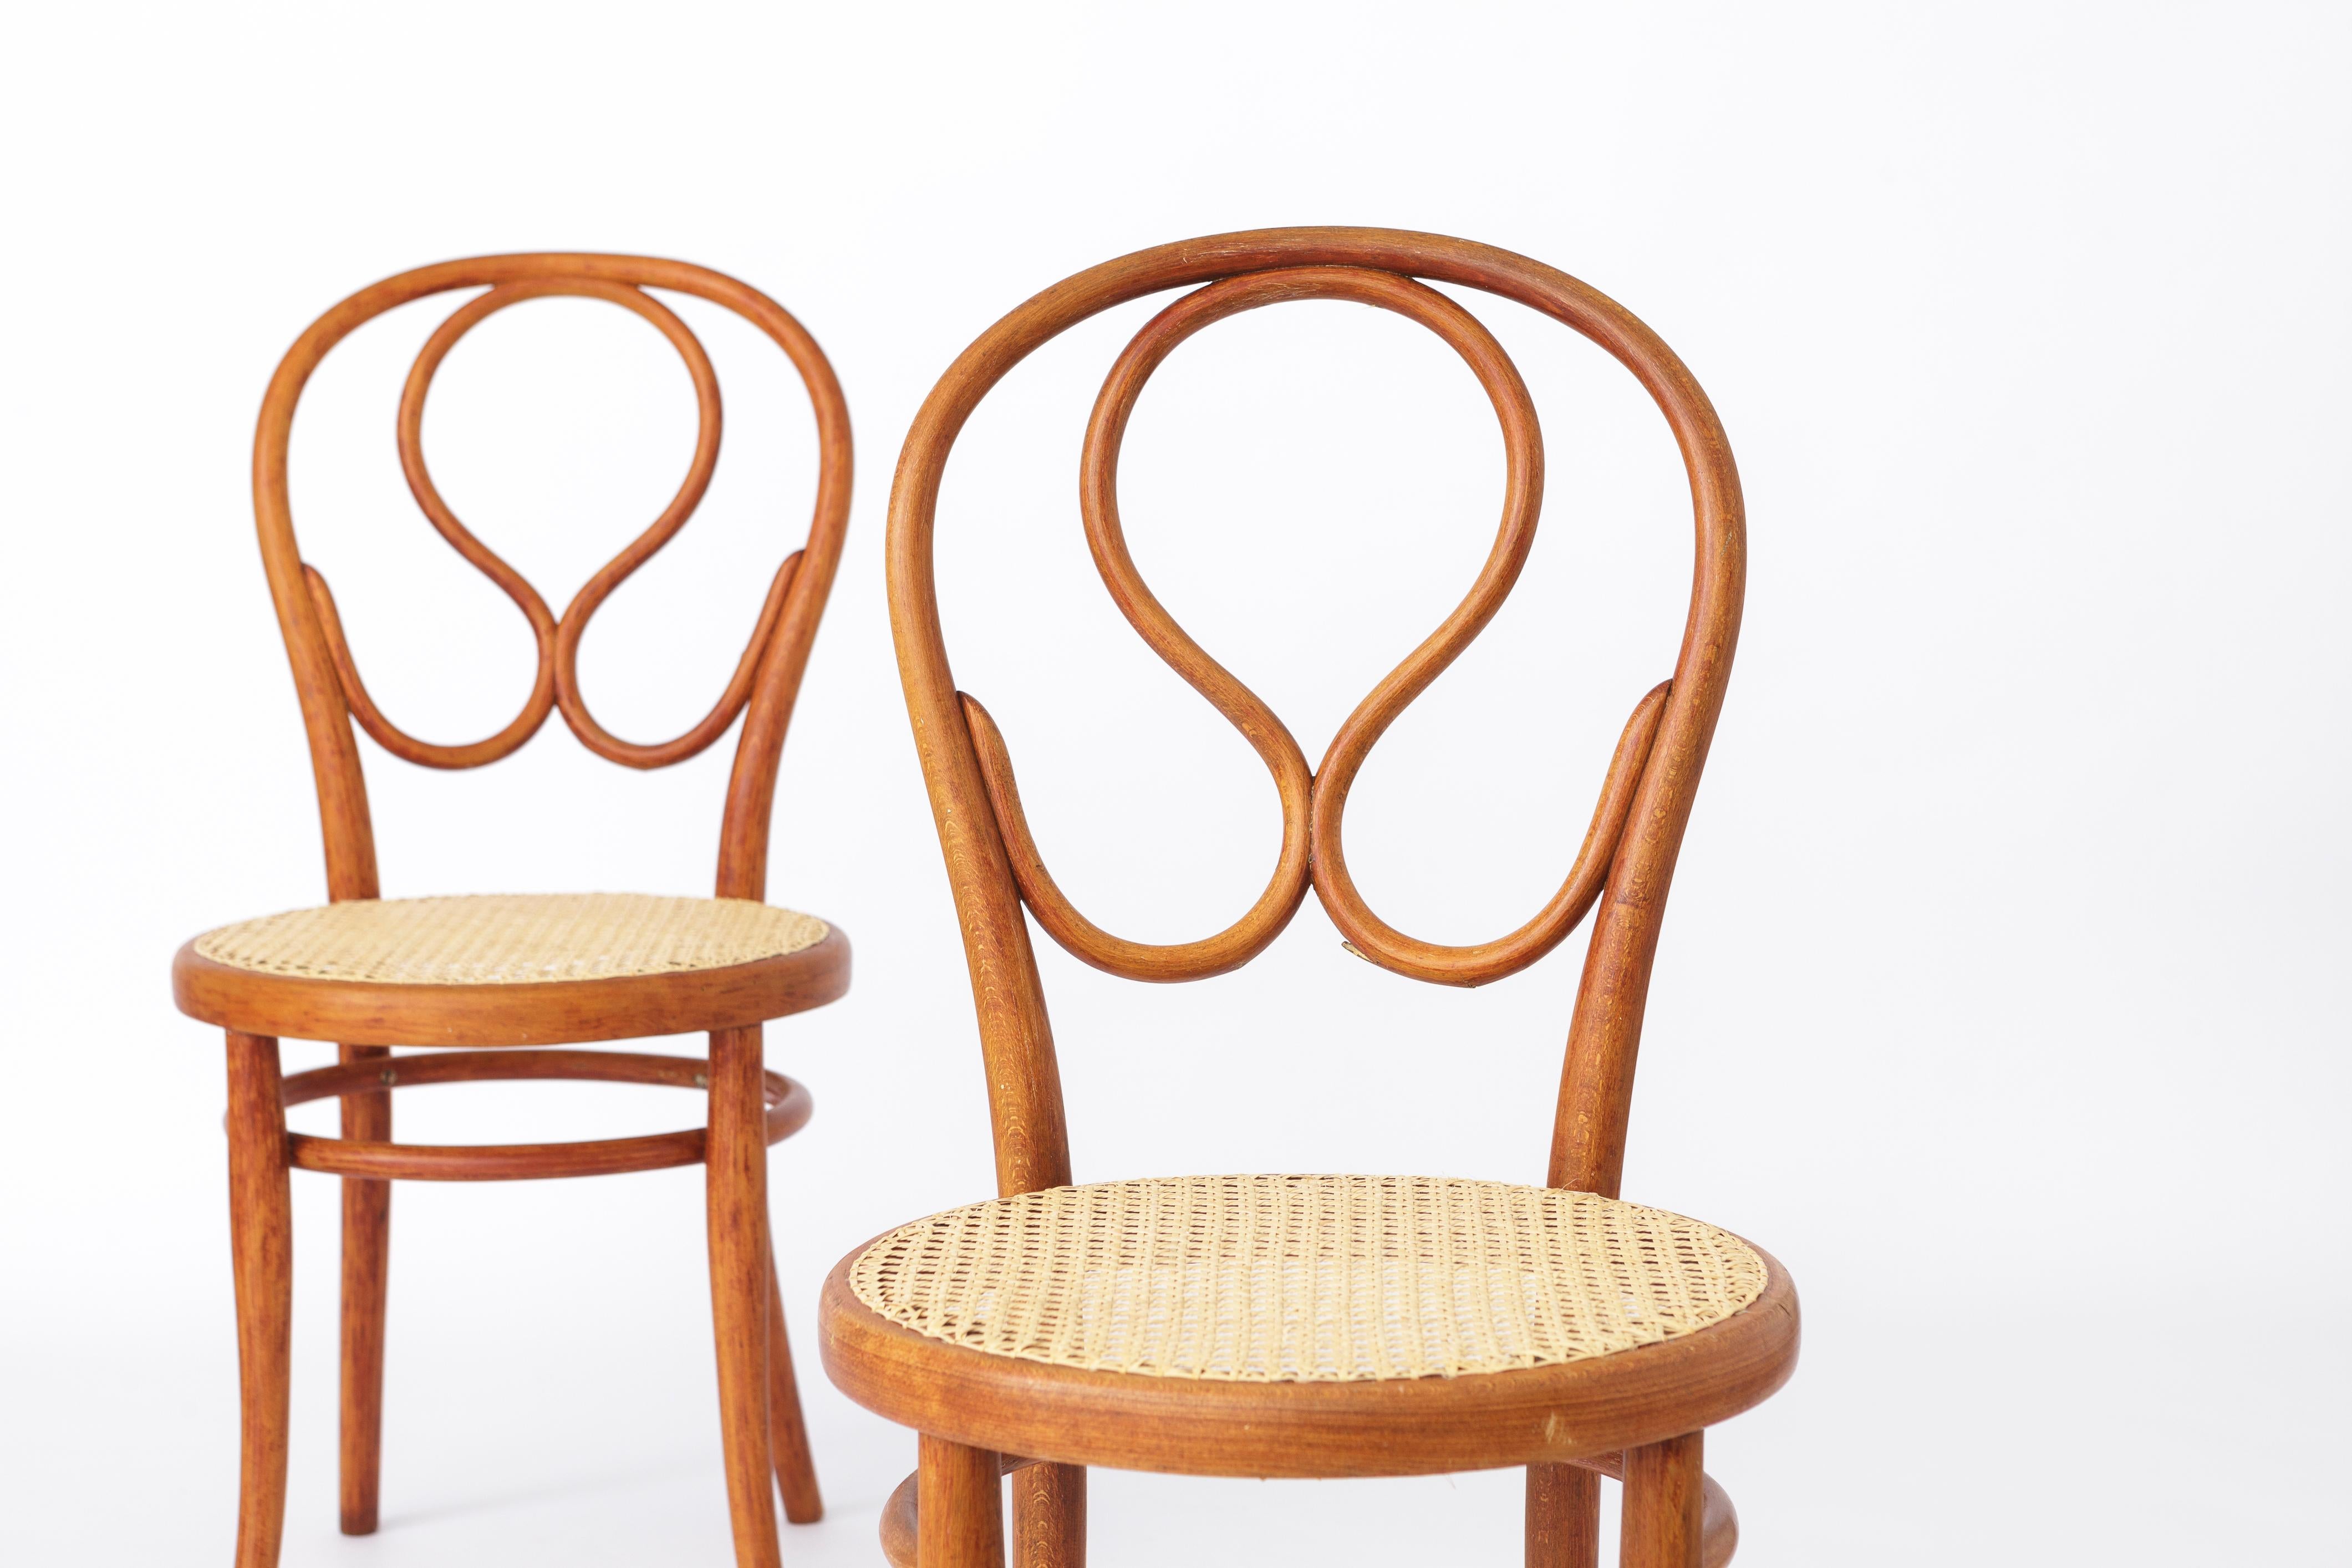 Two stunning Thonet chairs, the inventor of bentwood furniture mid of 19th century. Here two beautiful models no. 20. Carefully restored, hand-rewoven cane seats. Design 1880s, manufacturing end of 19th - beginning of 20th century. 

Displayed price